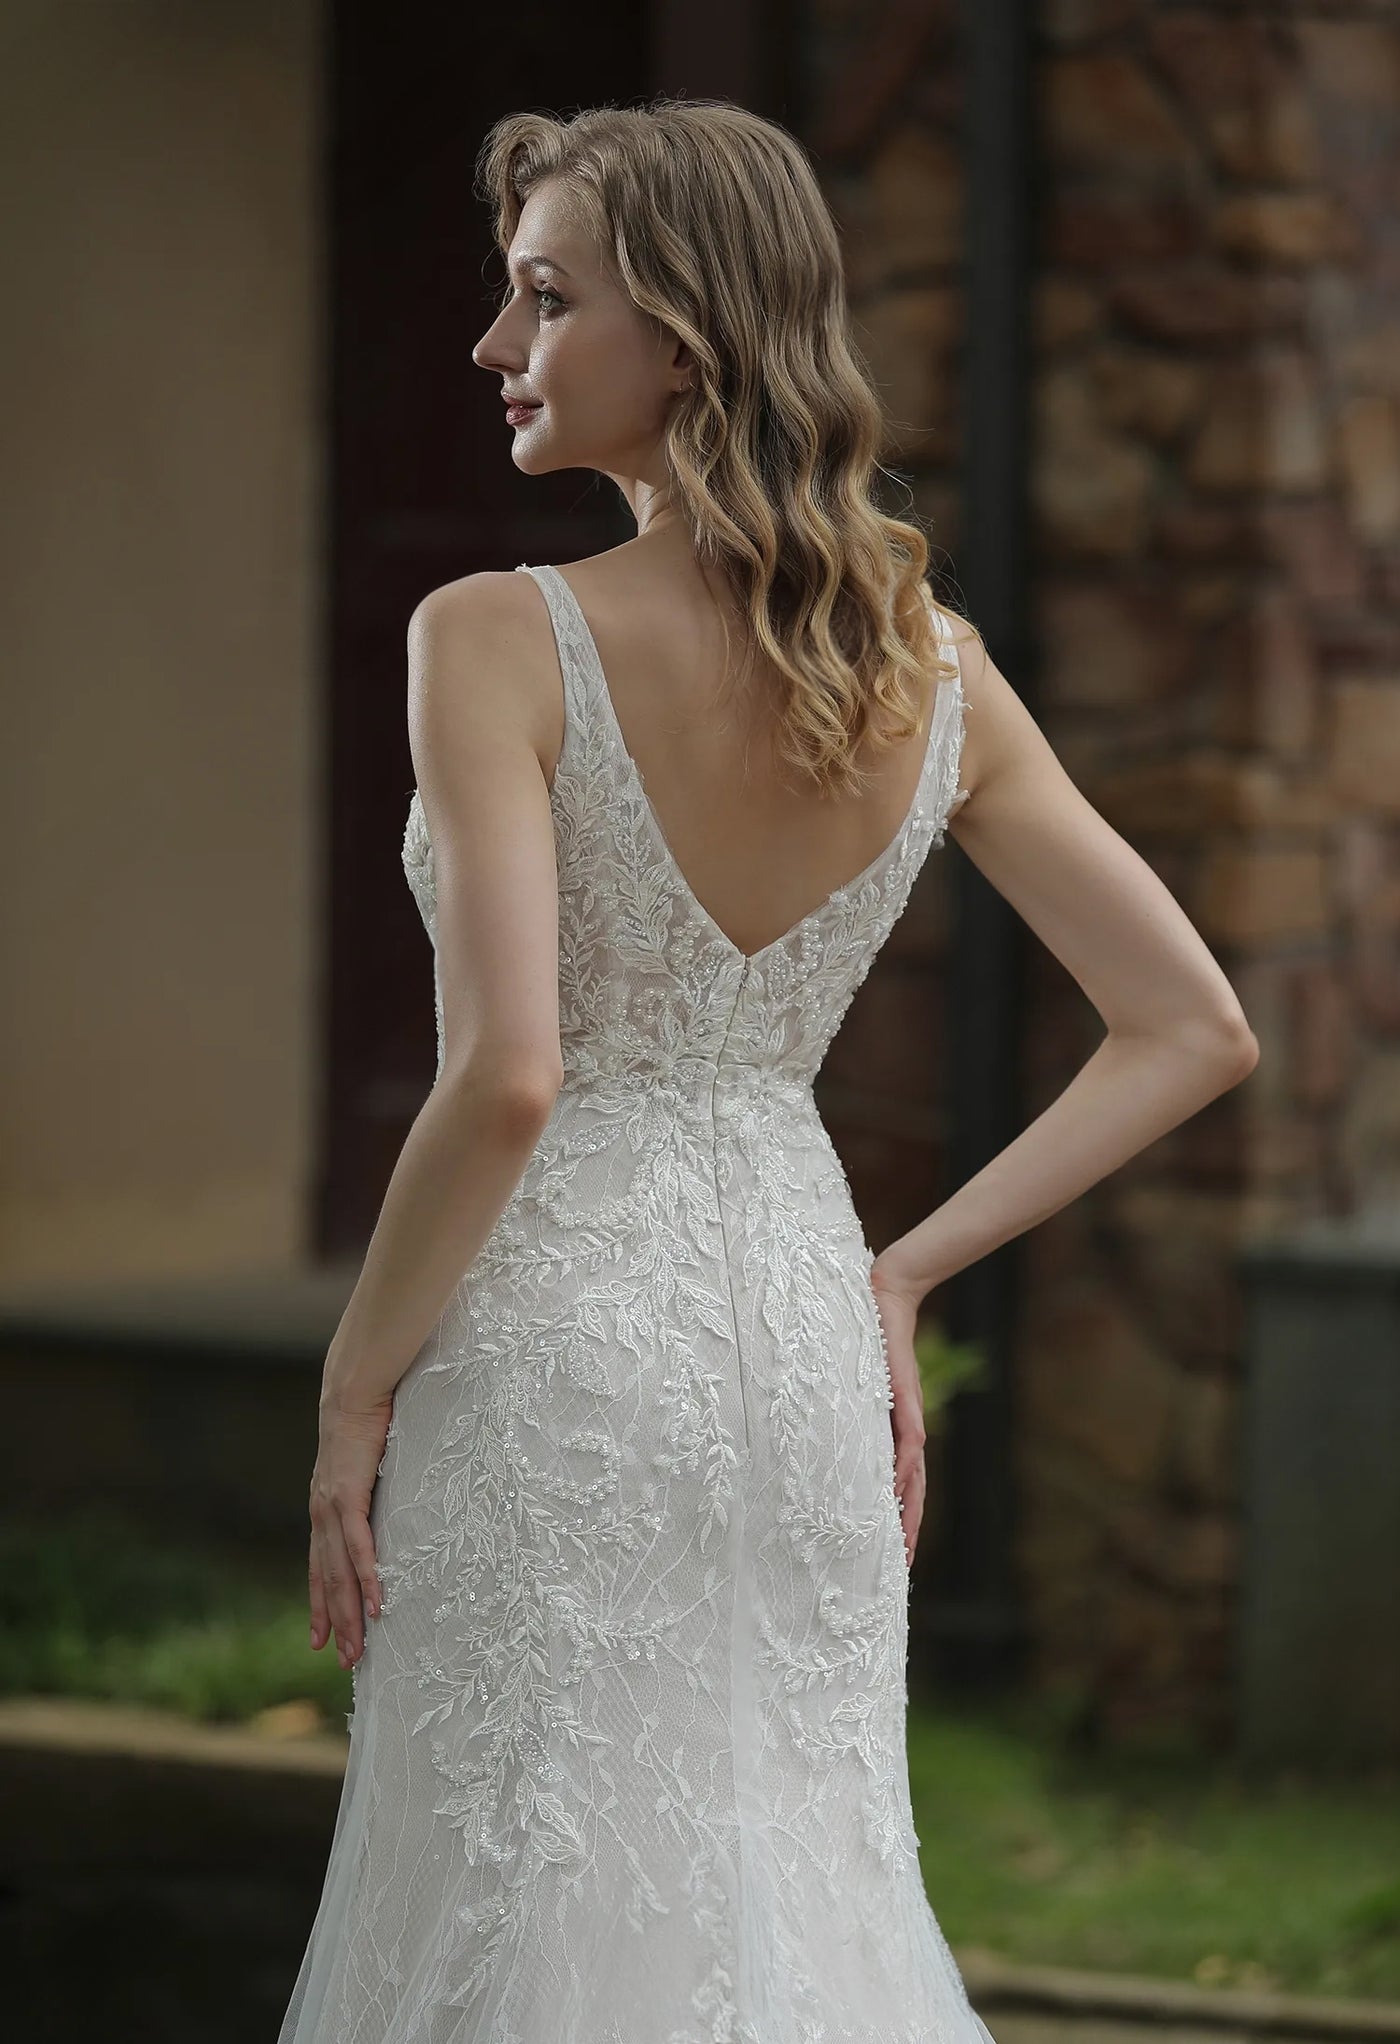 A woman wearing an elegant Bergamot Bridal Classic V-Neck Allover Lace Fit And Flare Wedding Dress gown looks over her shoulder.